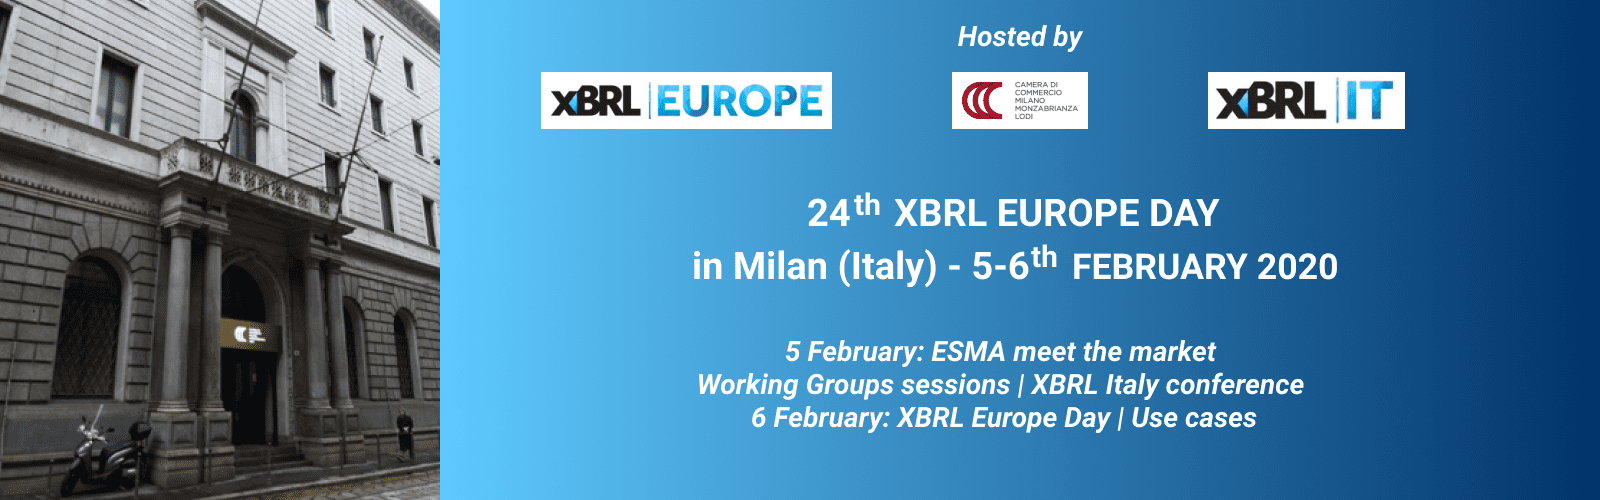 24th XBRL Europe Day